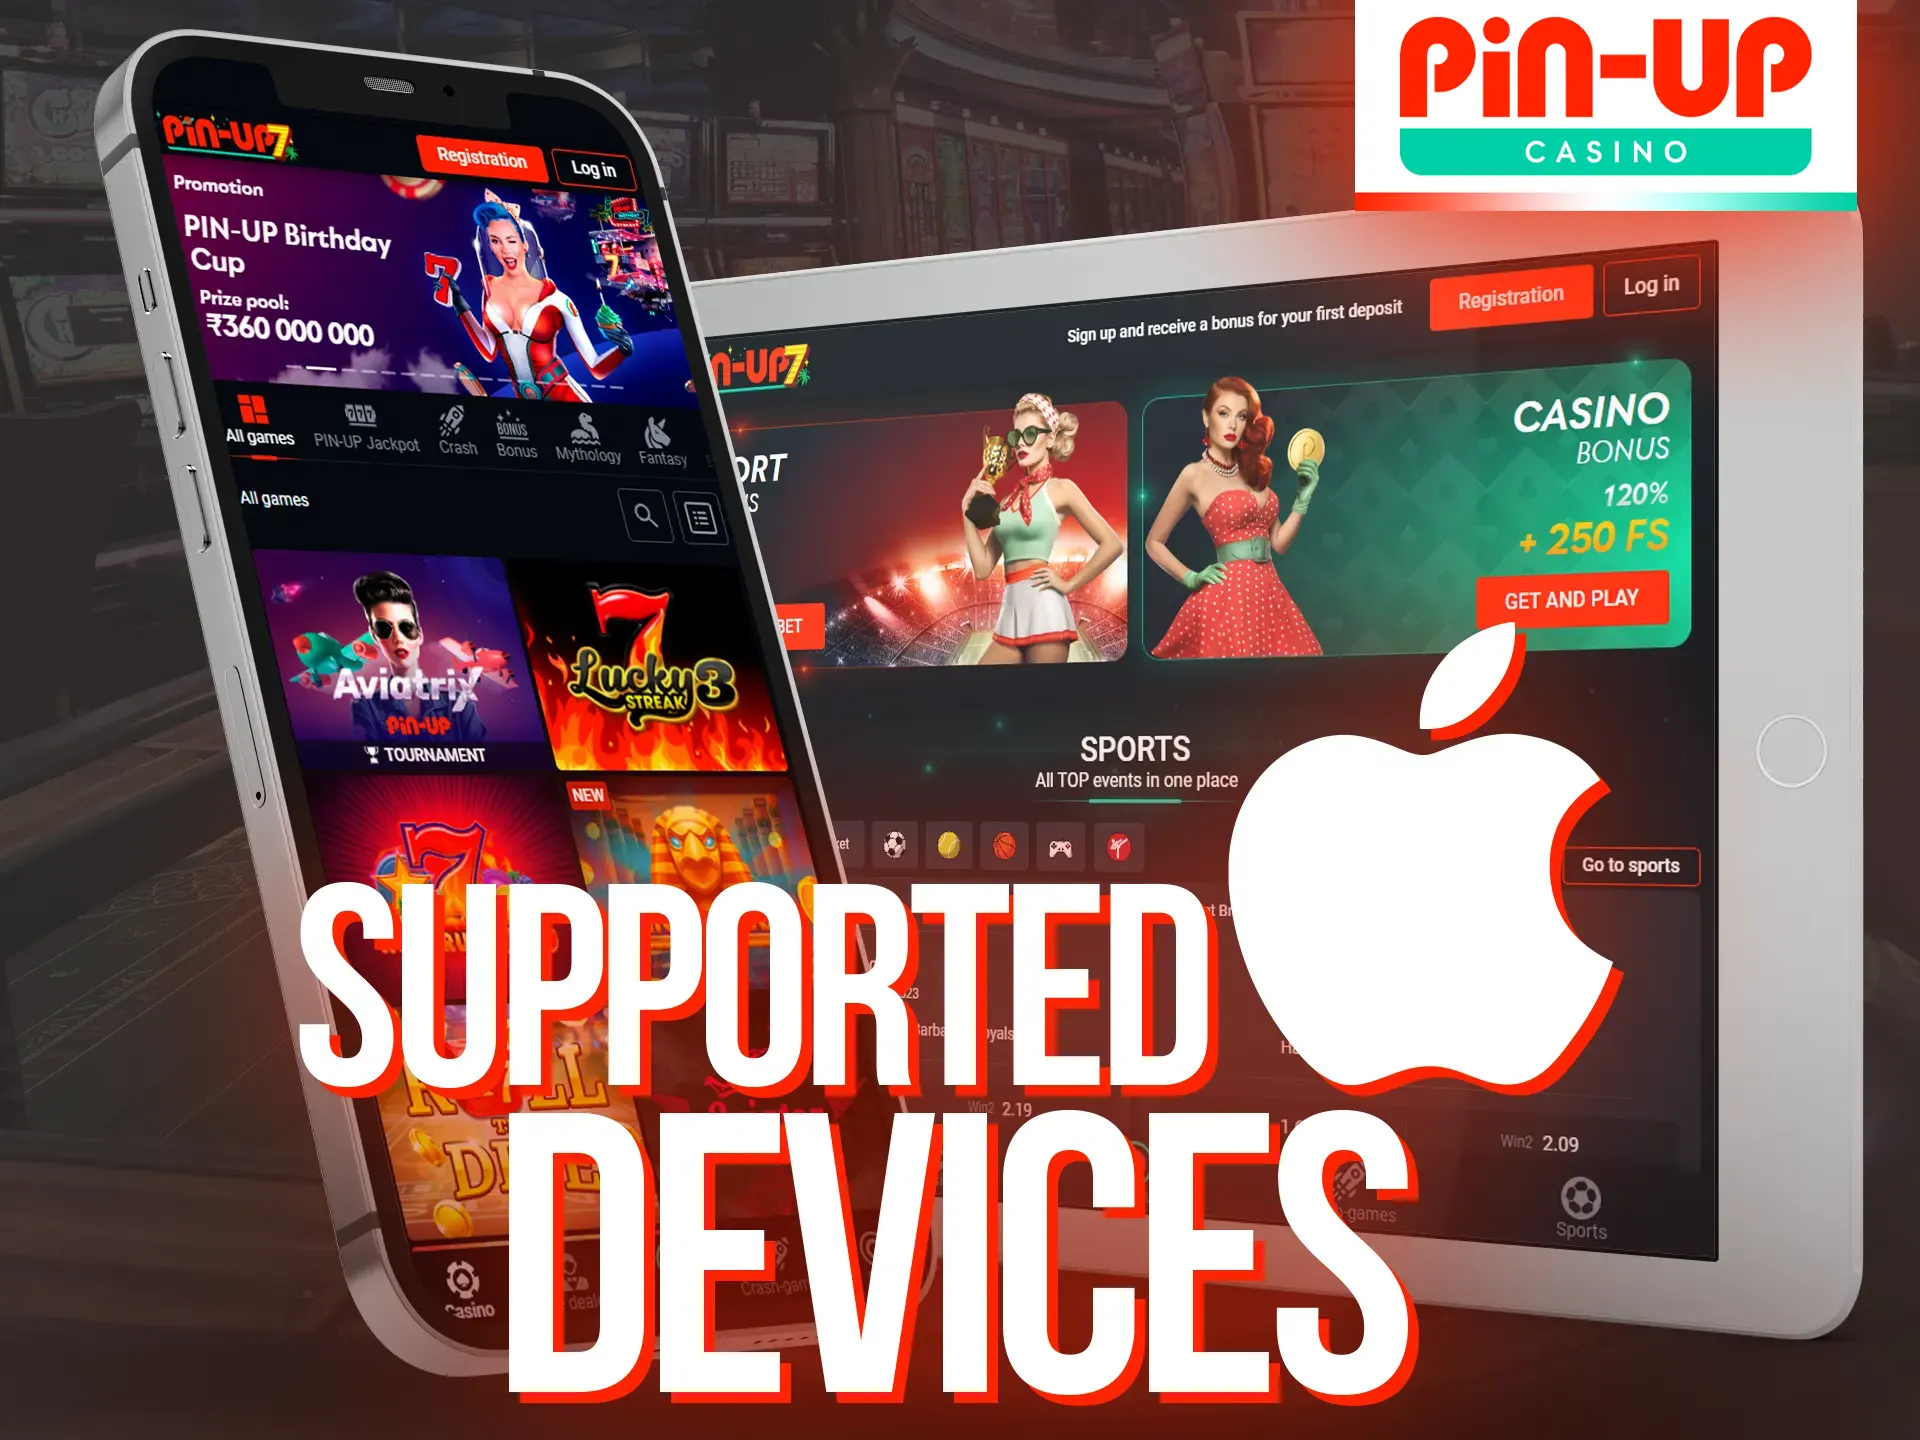 Play at Pin-Up online casino from your iOS device.